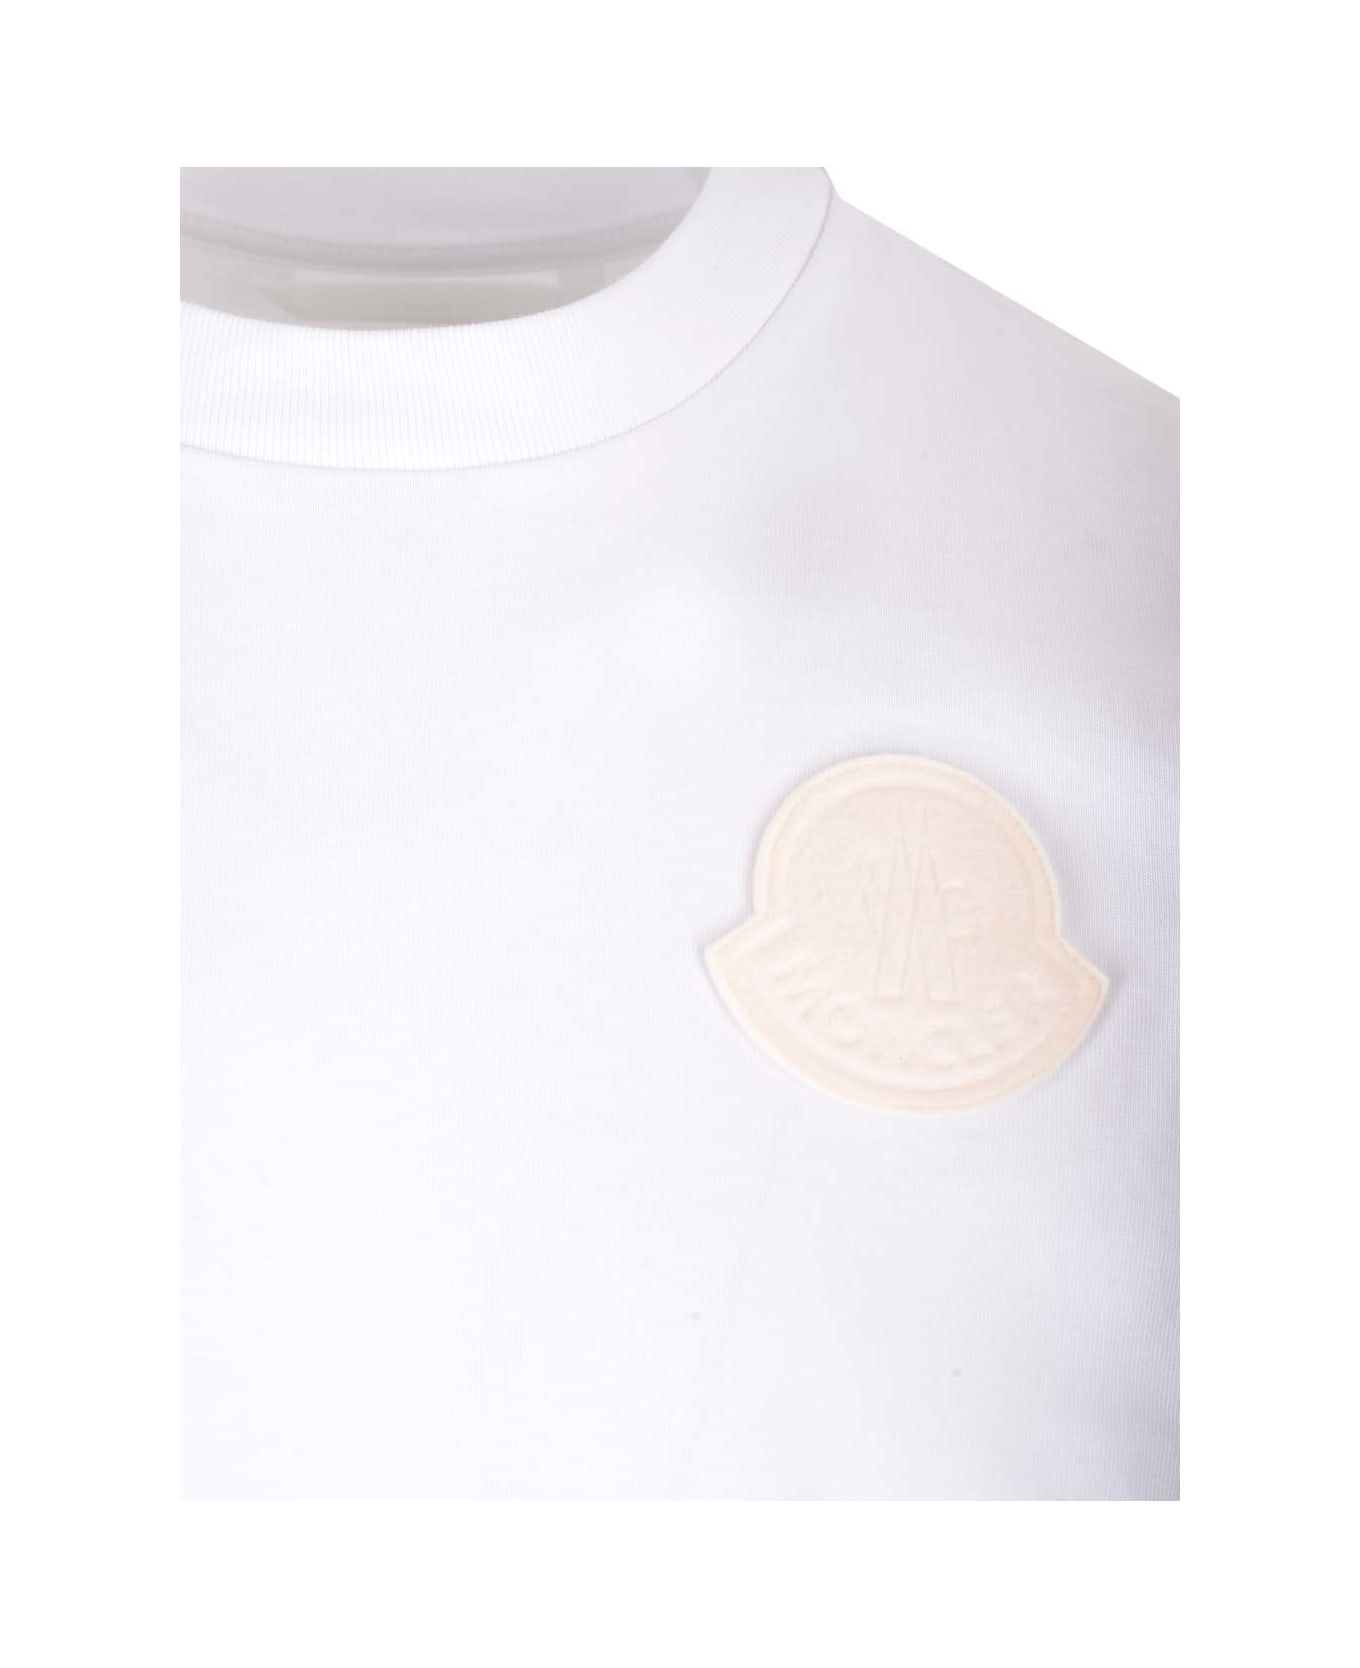 Moncler White T-shirt With Logo Patch - White